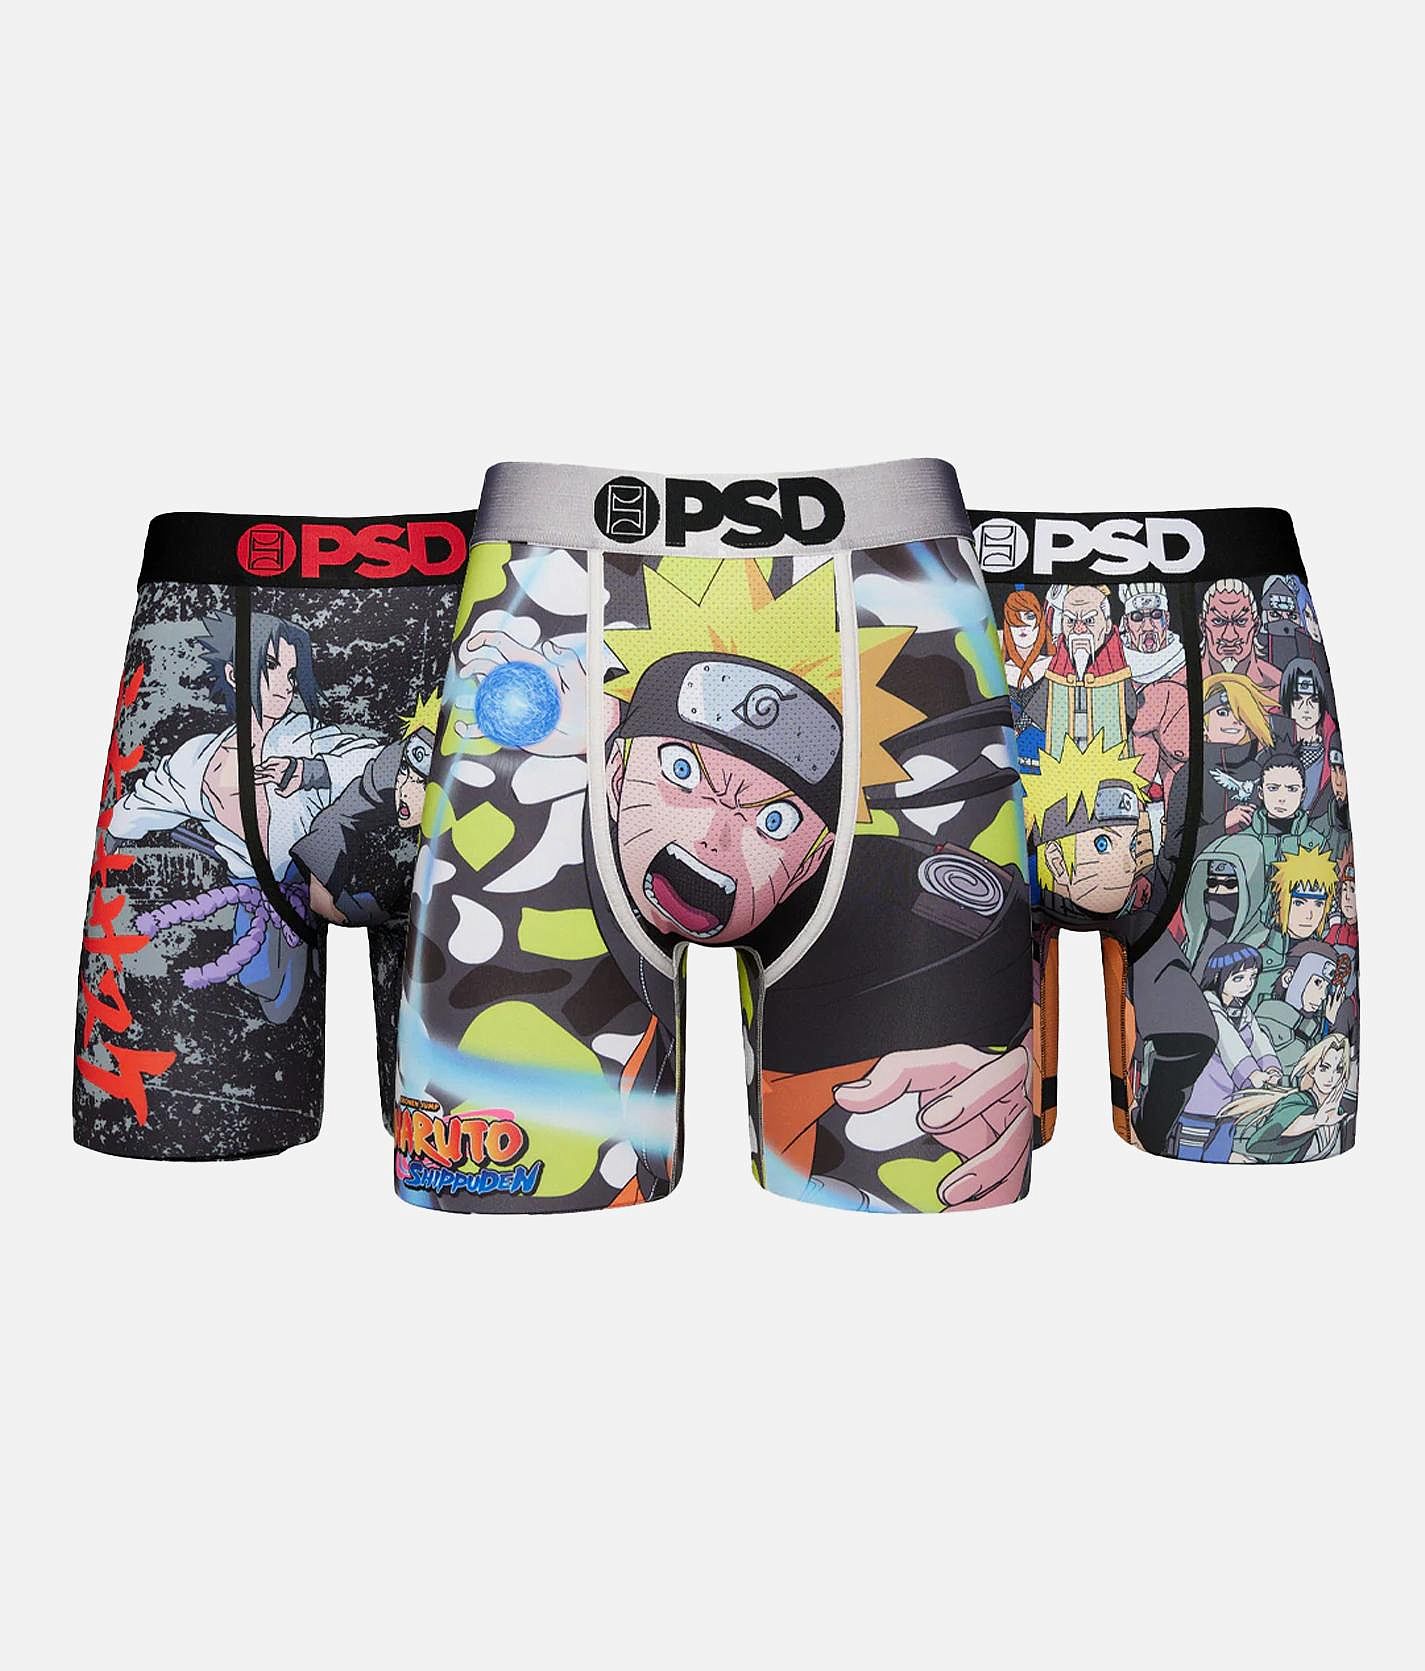 PSD 3 Pack Naruto Shippuden Stretch Boxer Briefs - Men's Boxers in